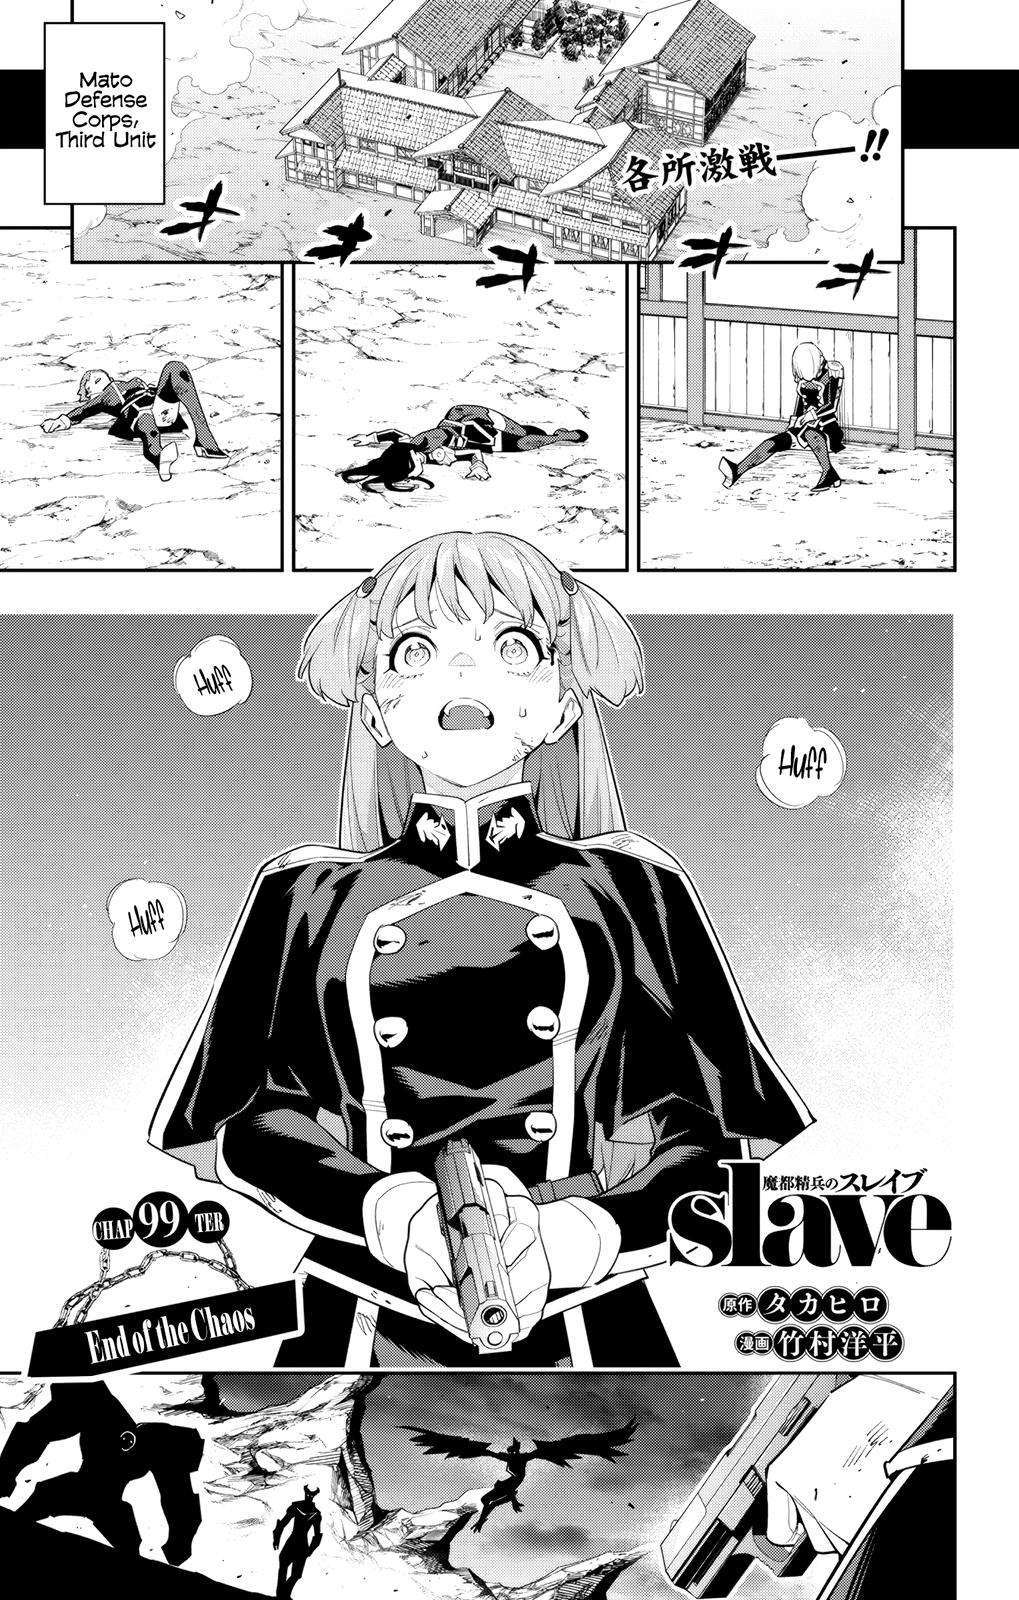 Slave of the Magic Capital's Elite Troops - chapter 99 - #1